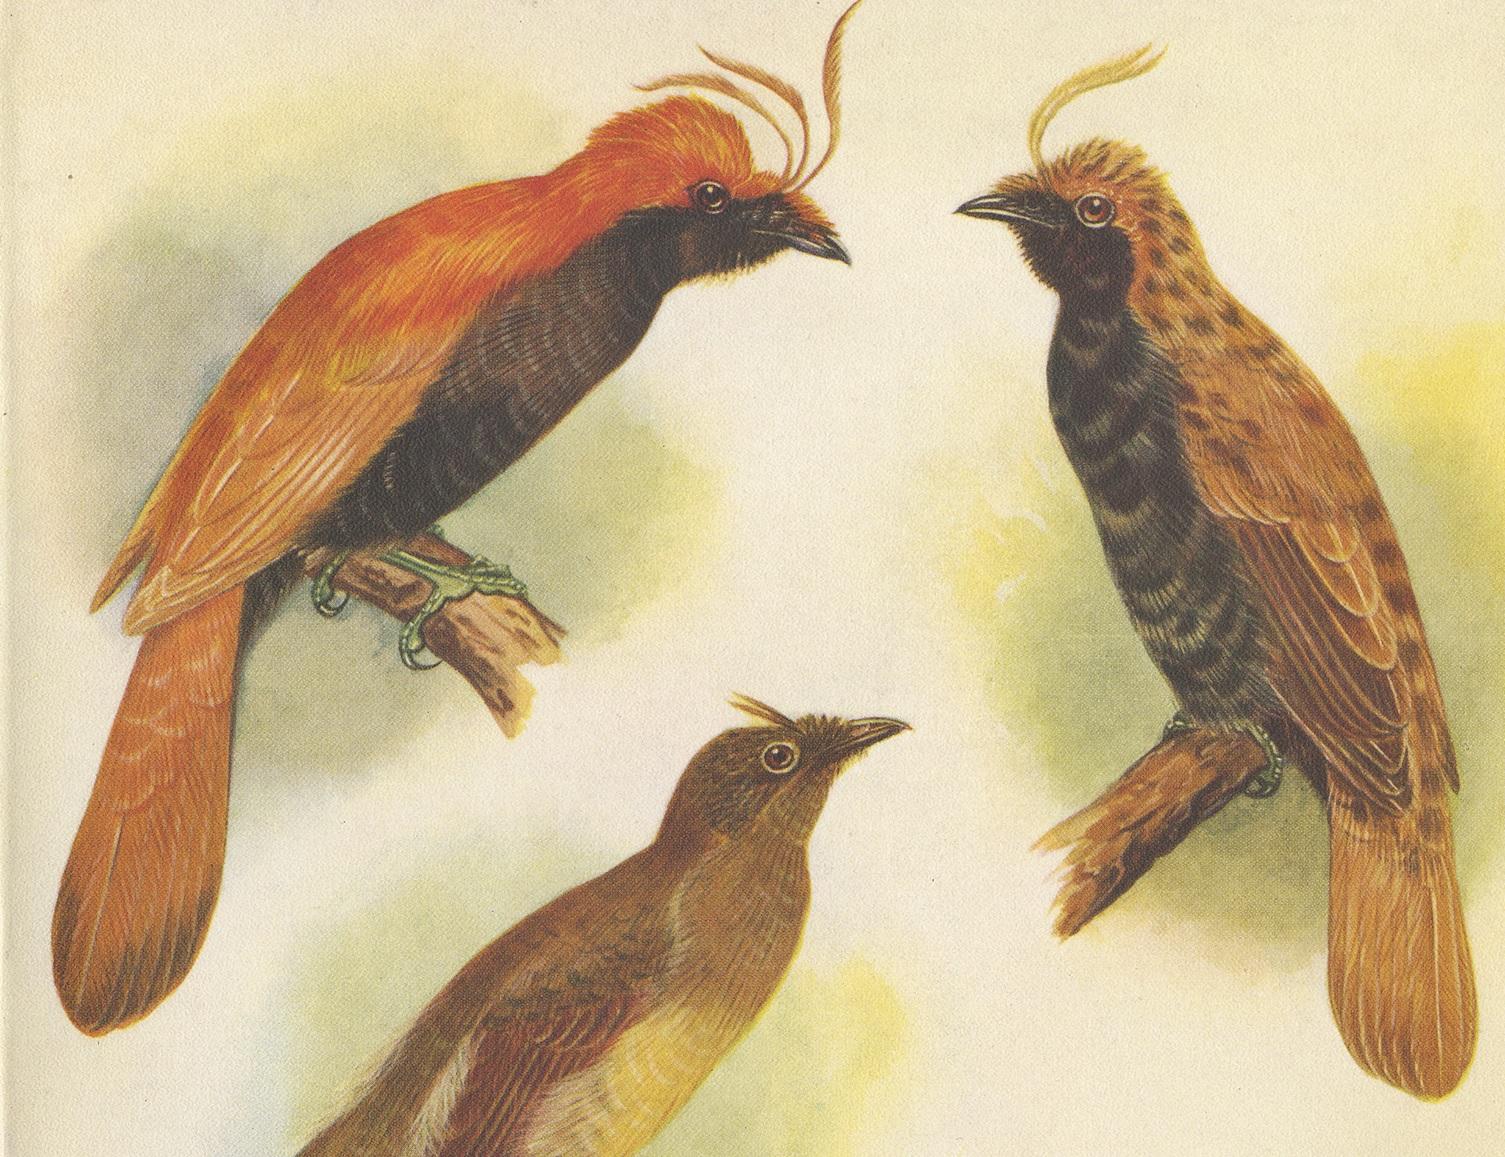 Decorative print illustrating various crested golden bird and Lauterbachs bower bird. This authentic print originates from 'Birds of Paradise and Bower Birds' by Tom Iredale. With coloured illustrations of Every Species by Lilian Medland. Published